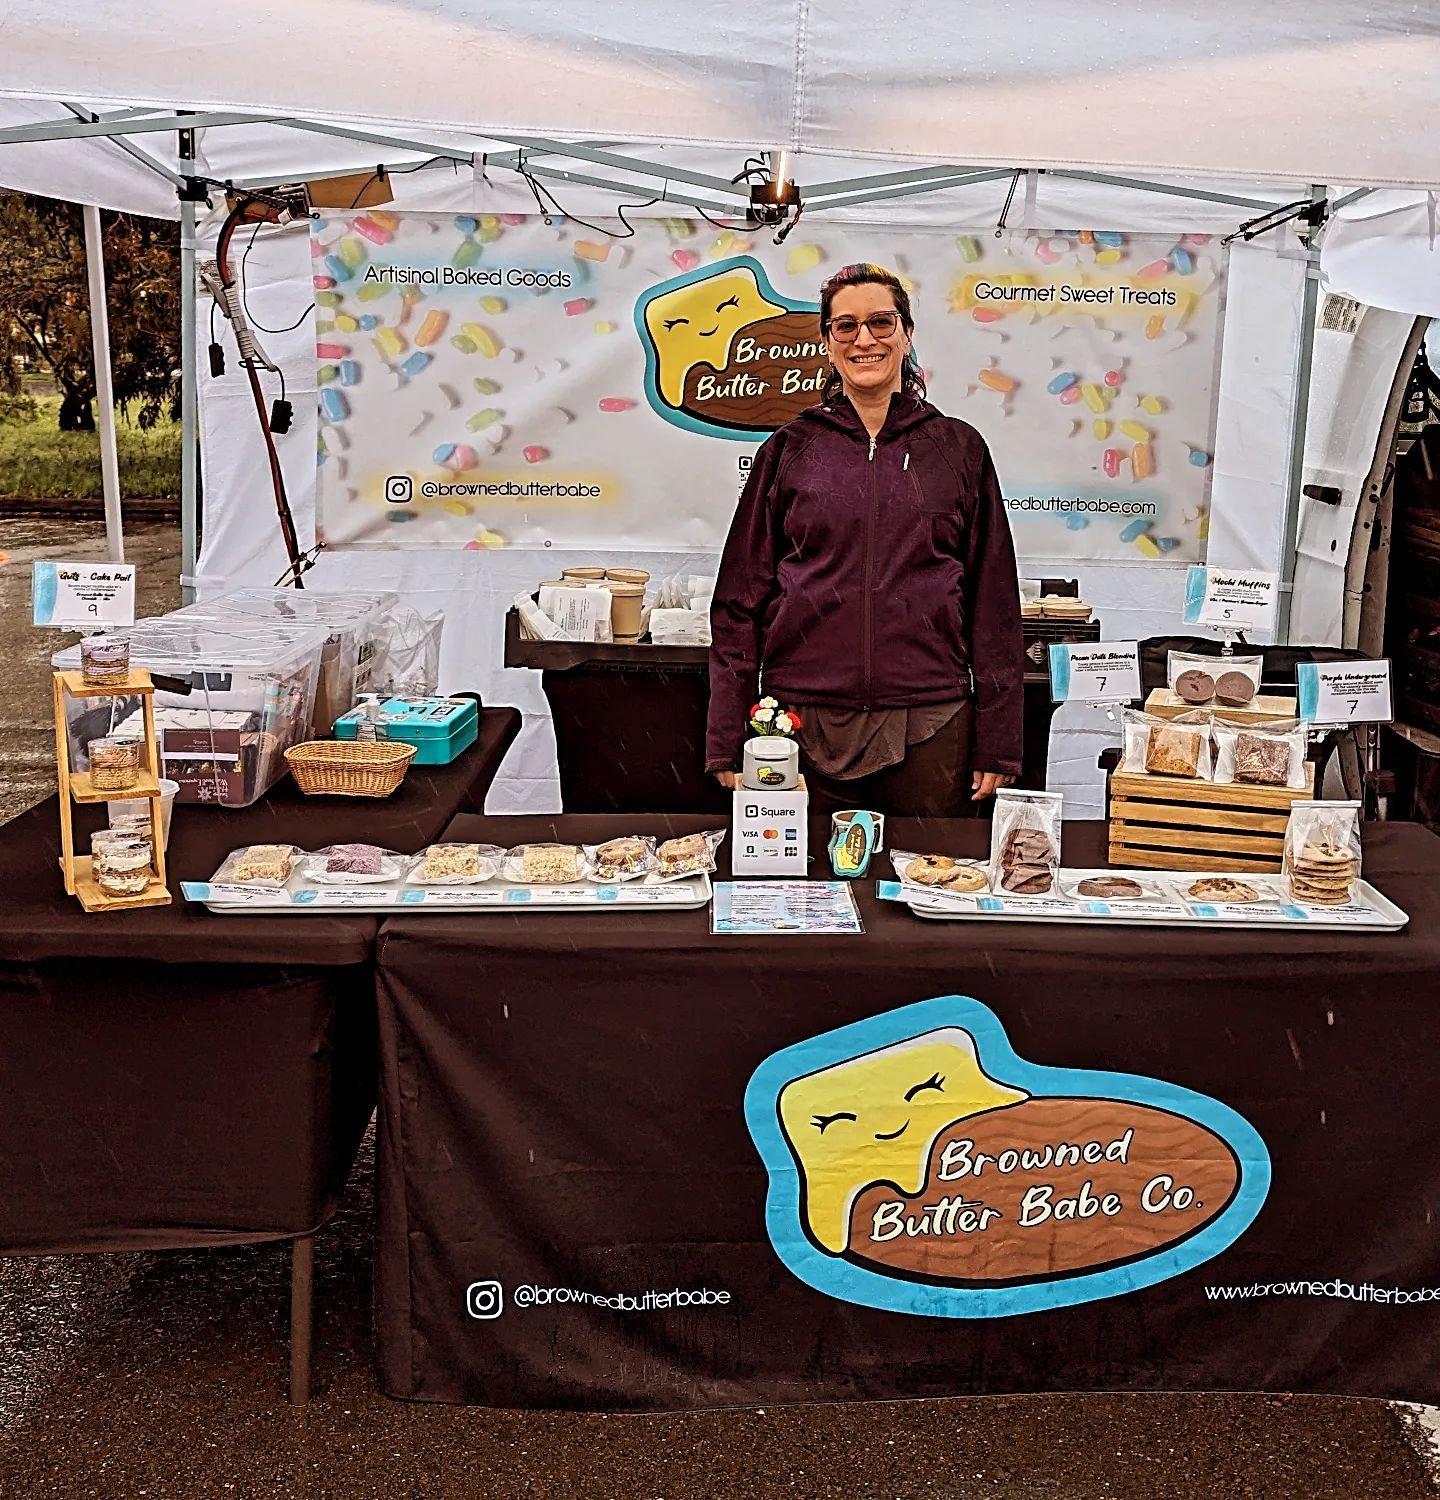 Our spirits aren't dampened by the rain. Stop by the @ohlonecollege.fleamarket and support a local small business! 
.
.
#rainraingoaway #rainyday #fleamarket #vendor #cottagefood